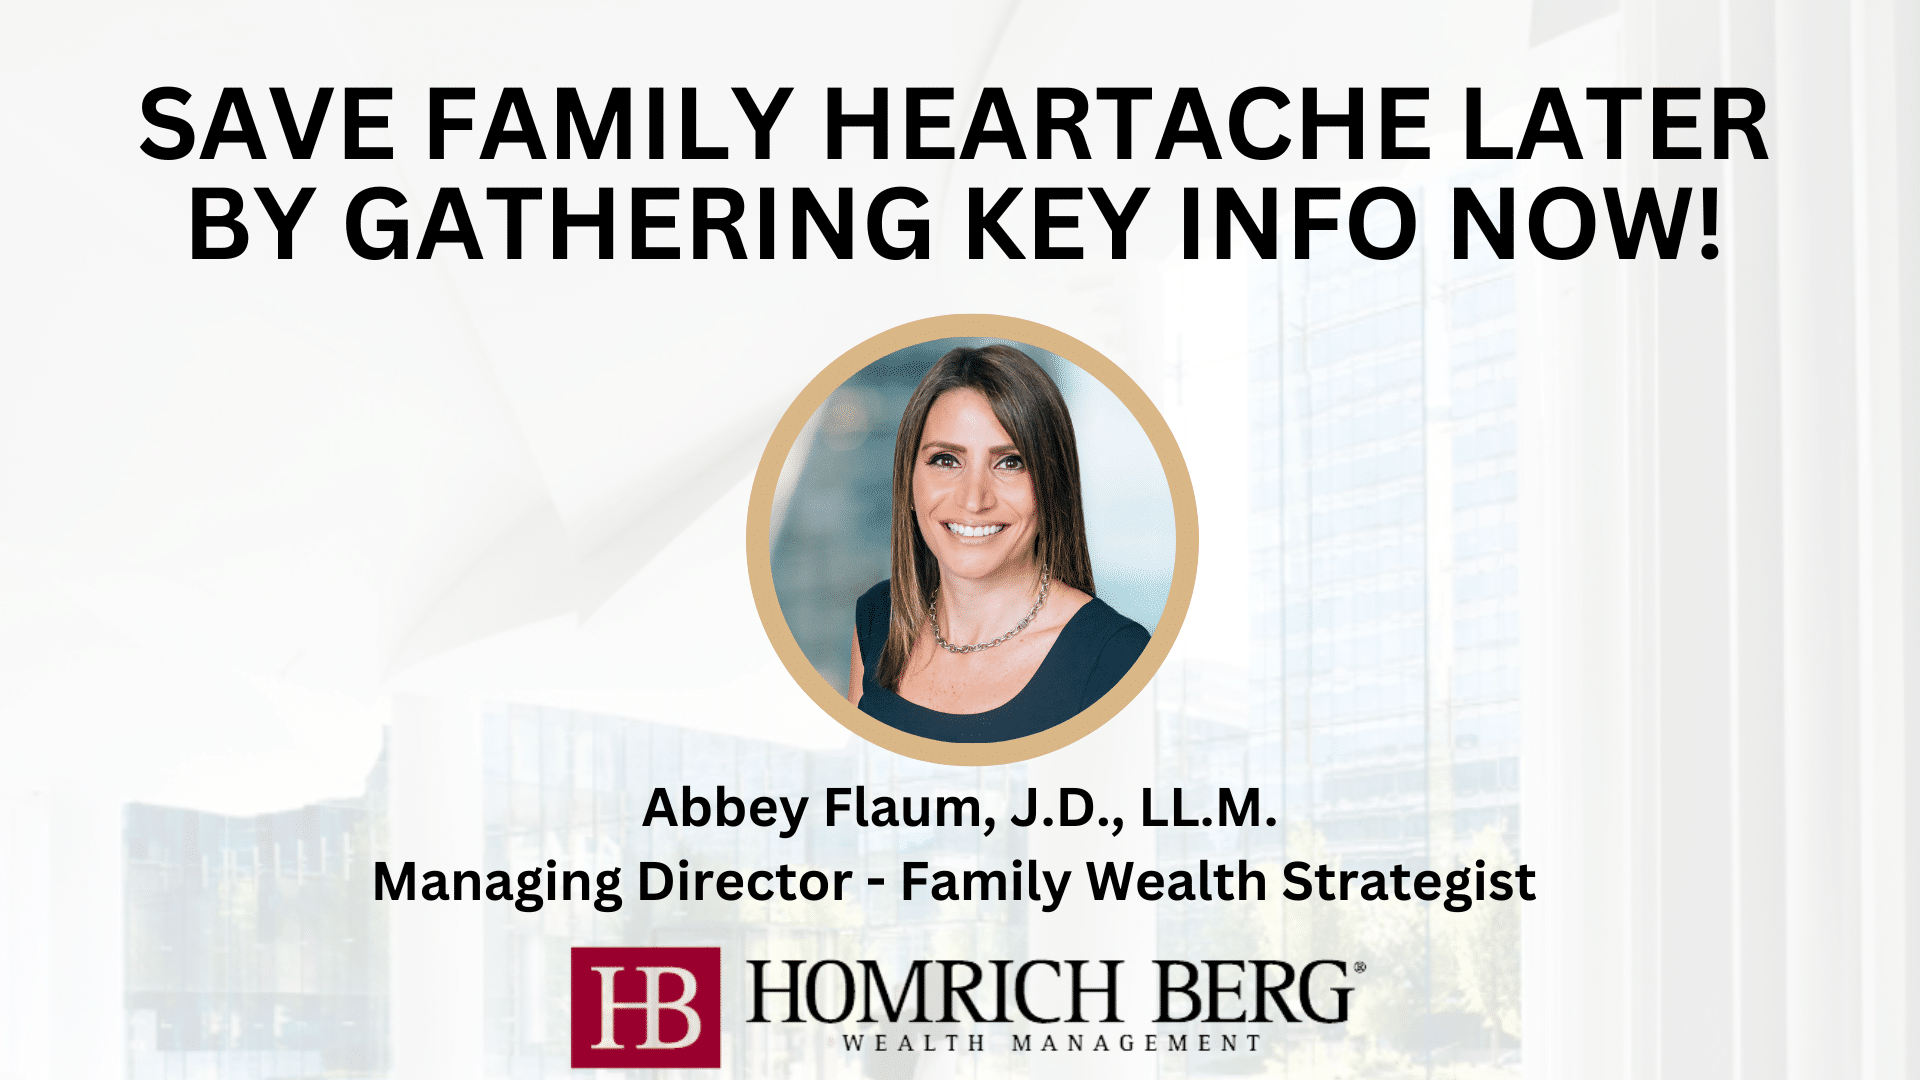 Gather Key Info and Save on family heartache